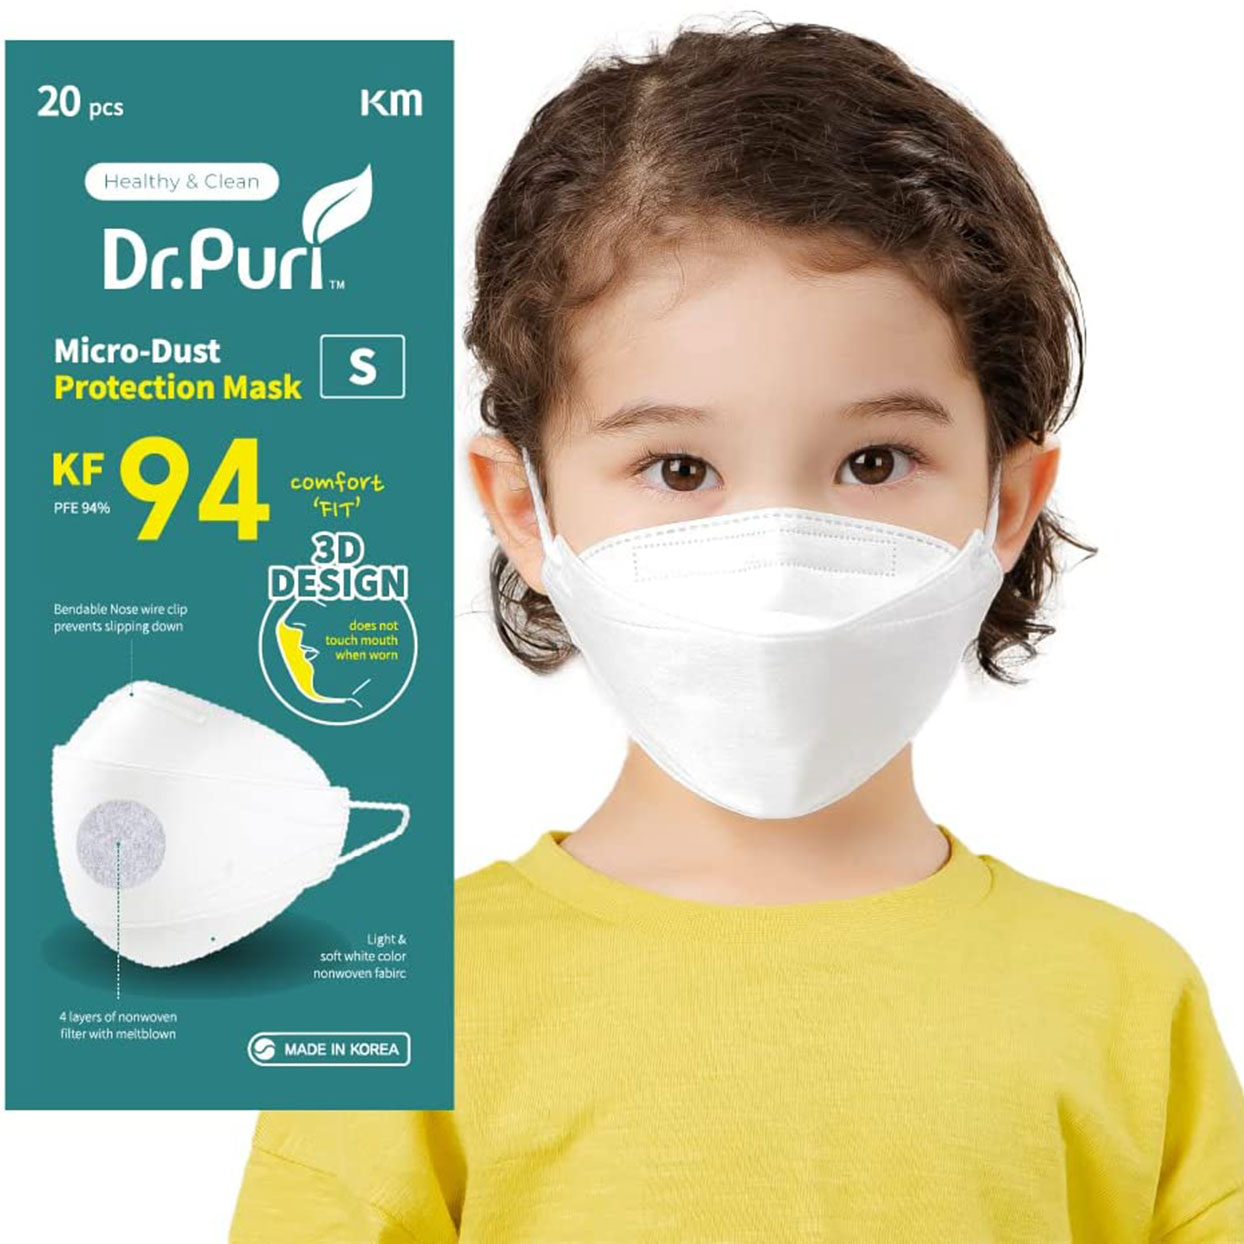 Dr. Puri New Micro-Dust Protection KF94 Mask for Kids (20-pack)